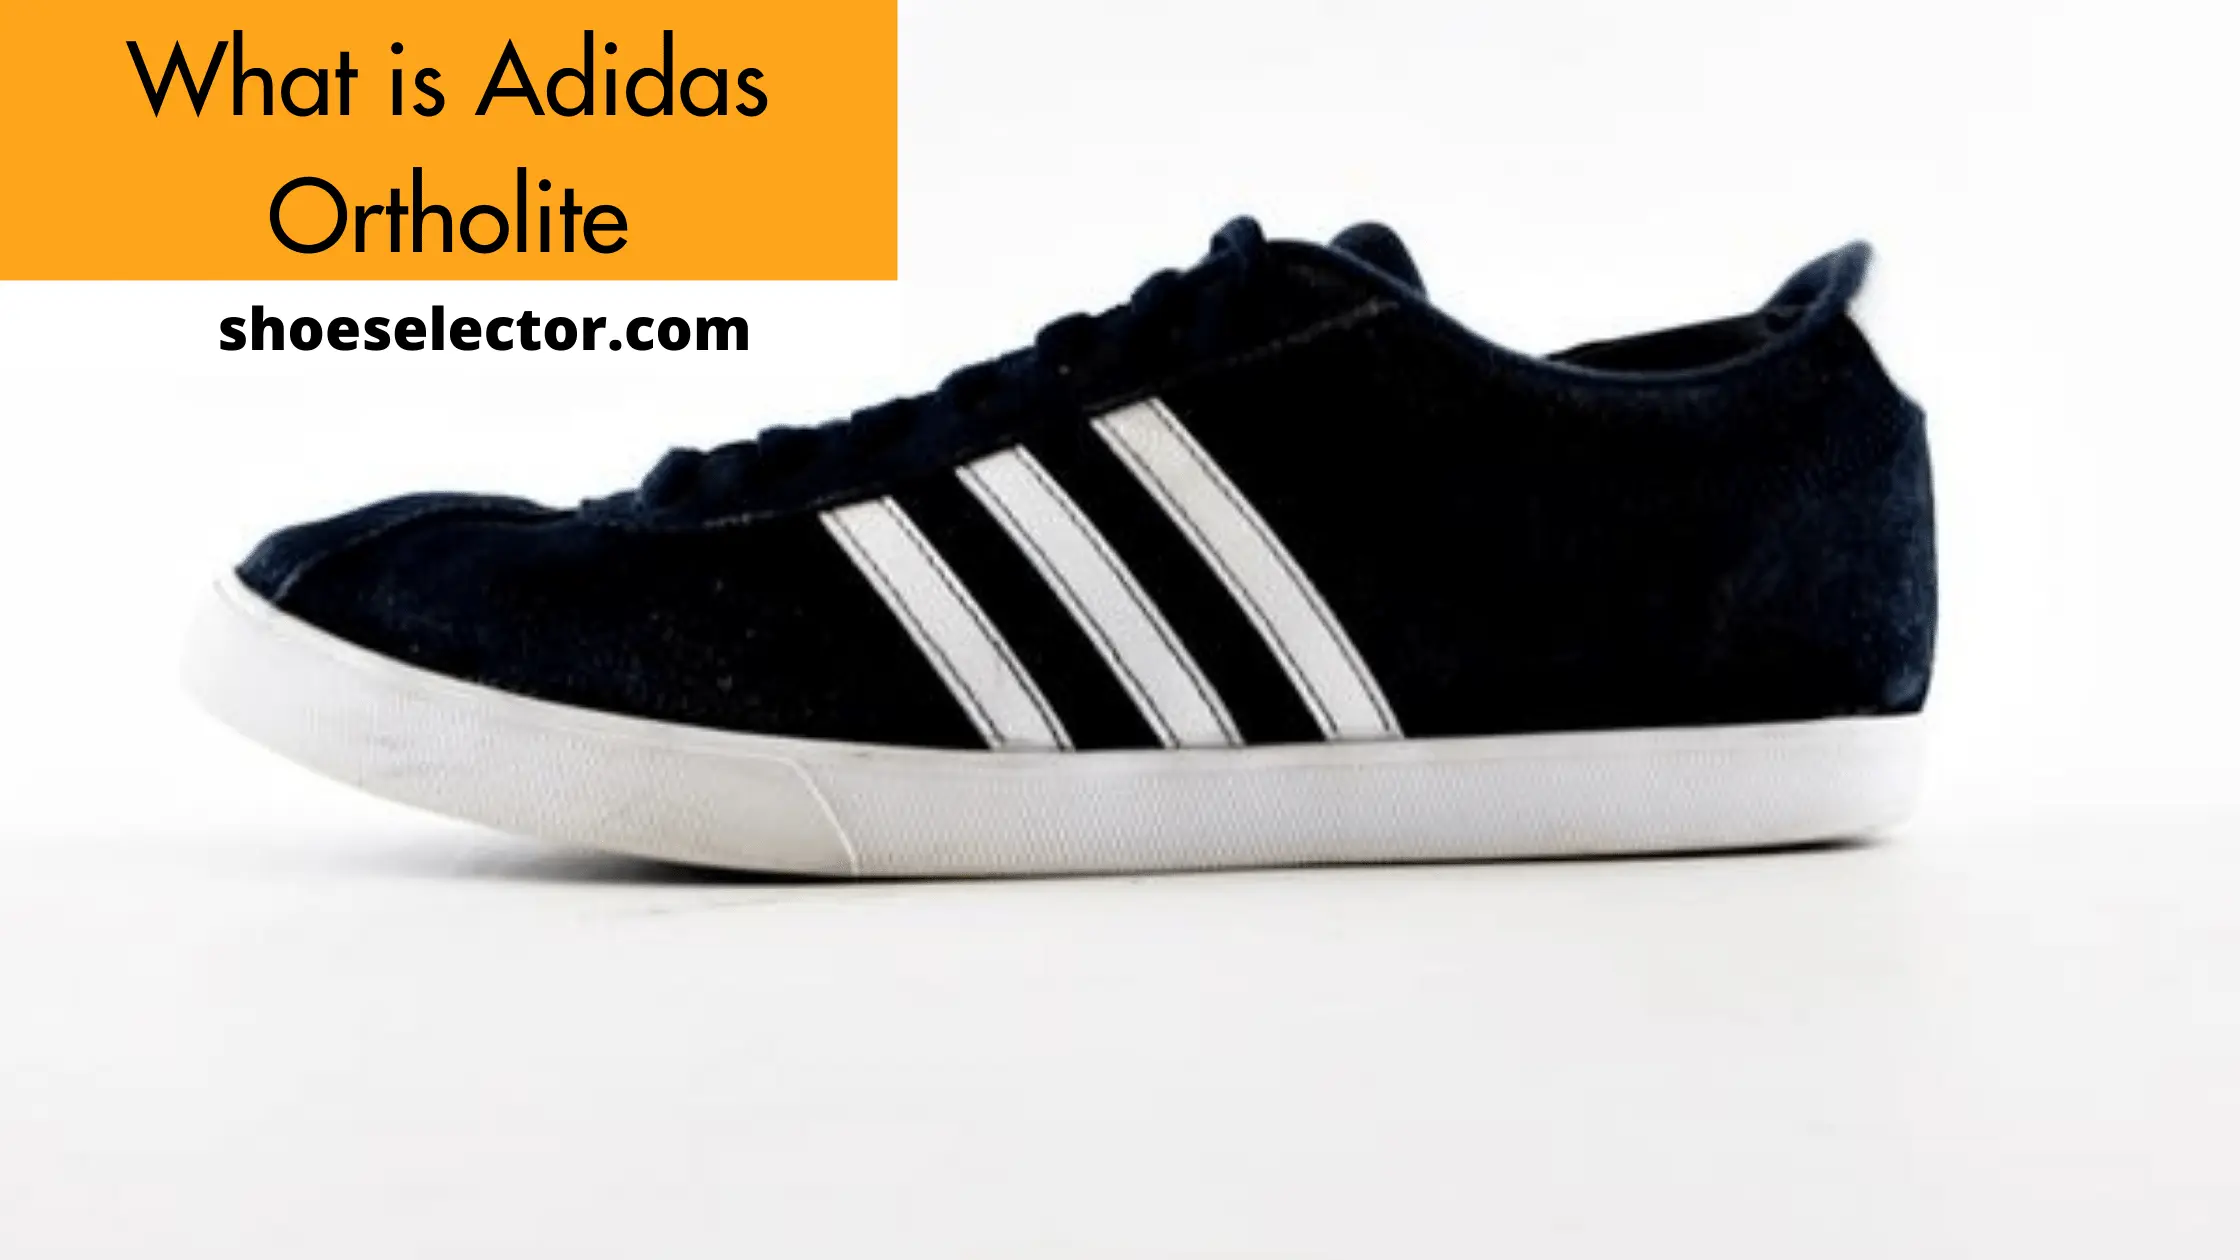 What is Adidas Ortholite? - Quick Guide